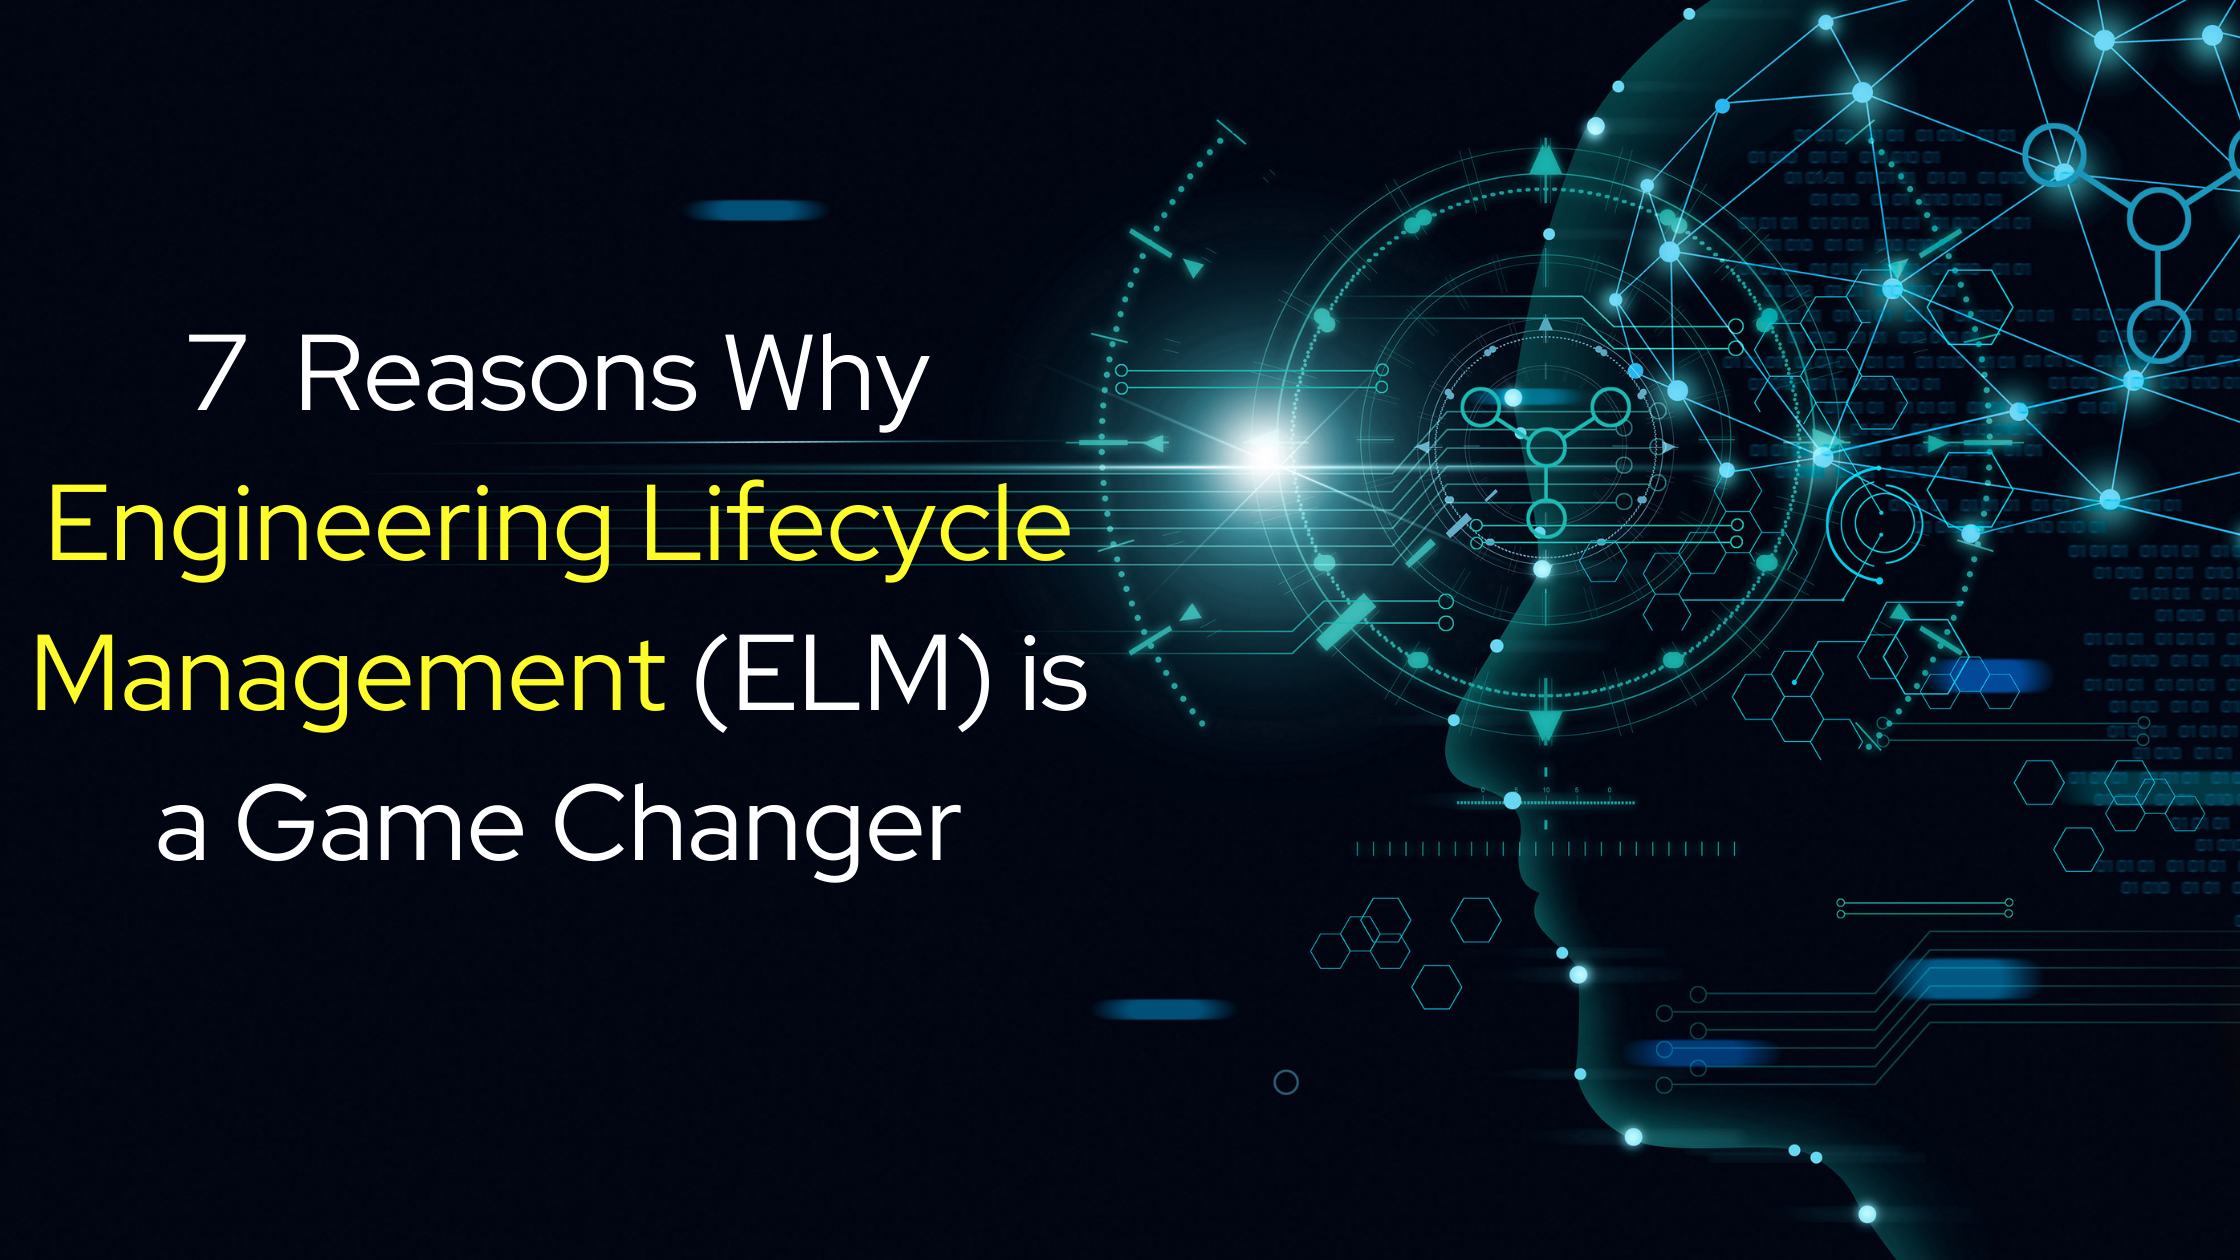 Seven-Reasons-Why-Engineering-Lifecycle-Management-ELM-is-a-Game-Changer.png